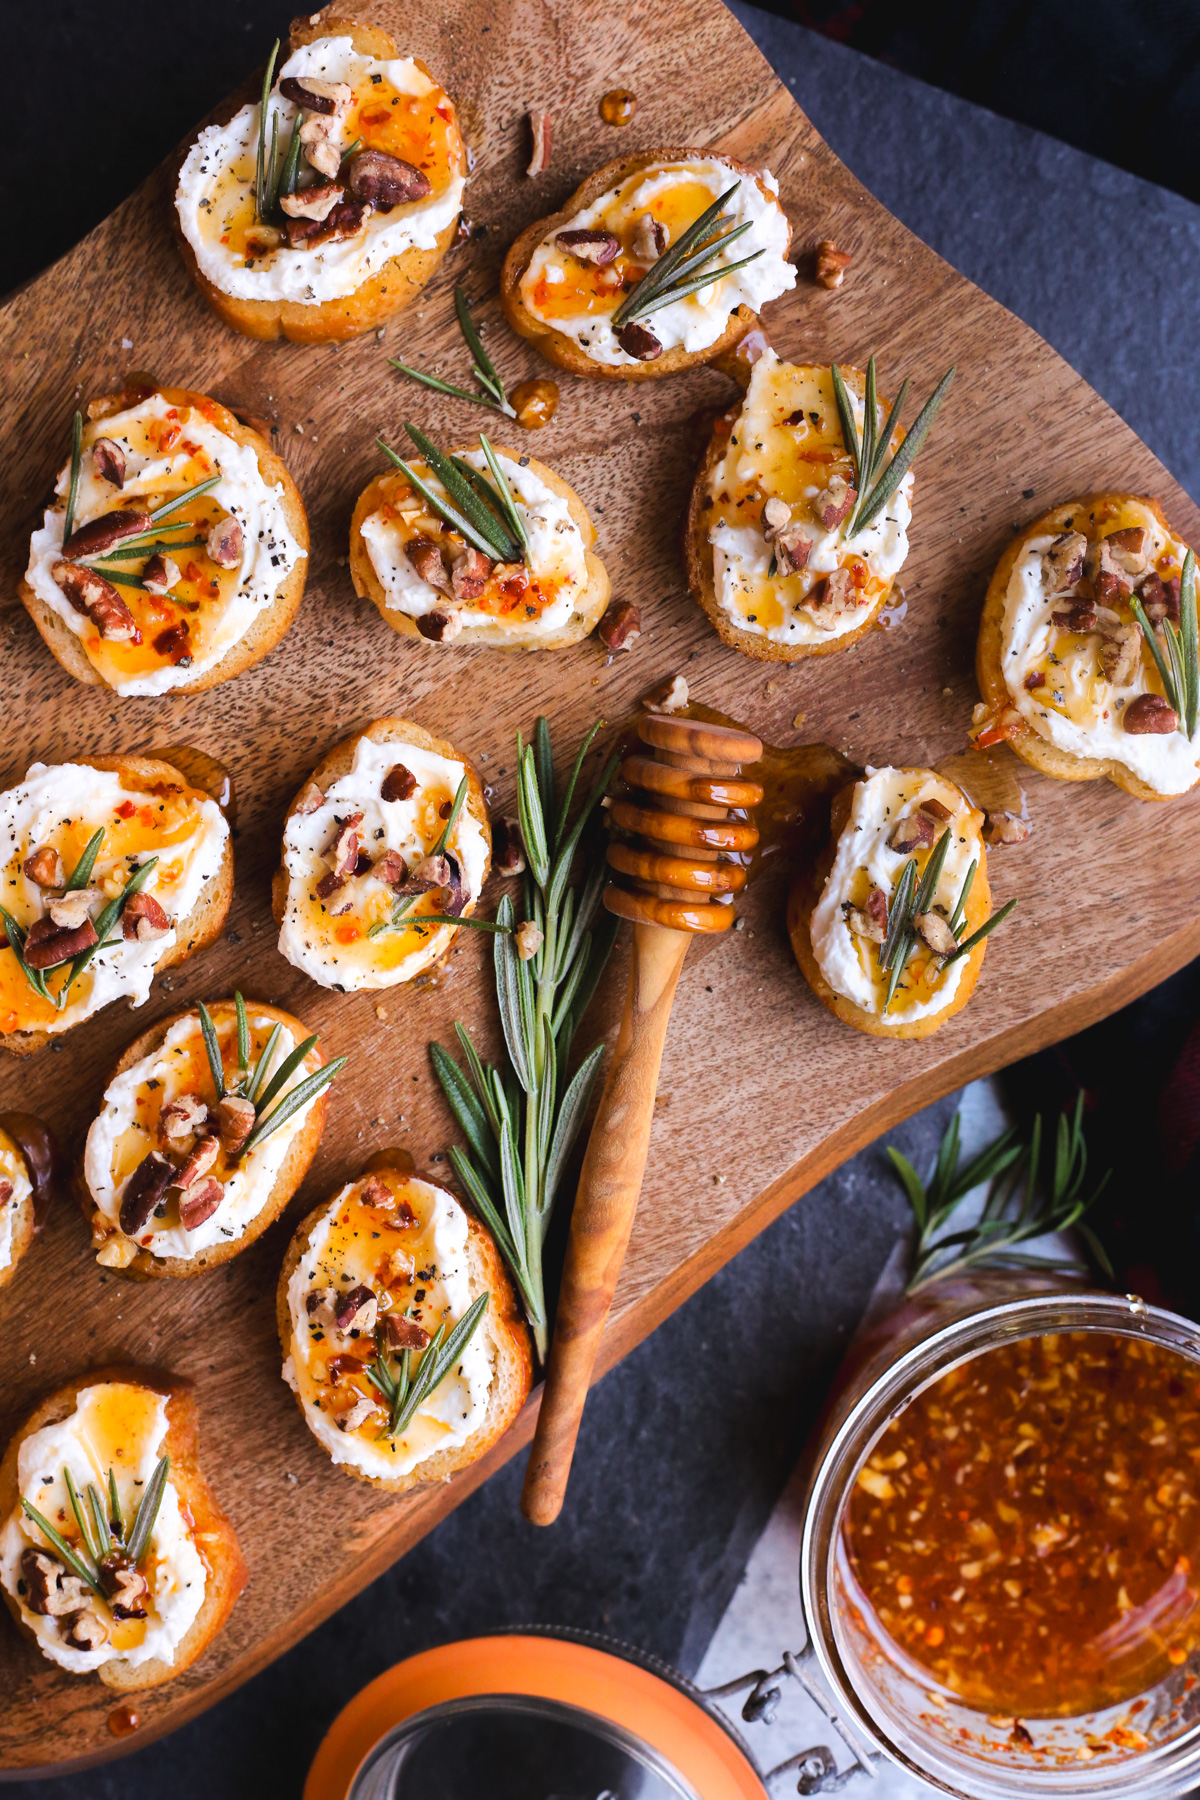 Overhead view of a wooden serving board with multiple whipped feta crostinis arranged on it, each topped with pecans, rosemary, and a drizzle of hot honey. A jar with leftover hot honey and extra sprigs of rosemary are placed nearby and a honey dipper coated with the hot honey is pictured on the serving board